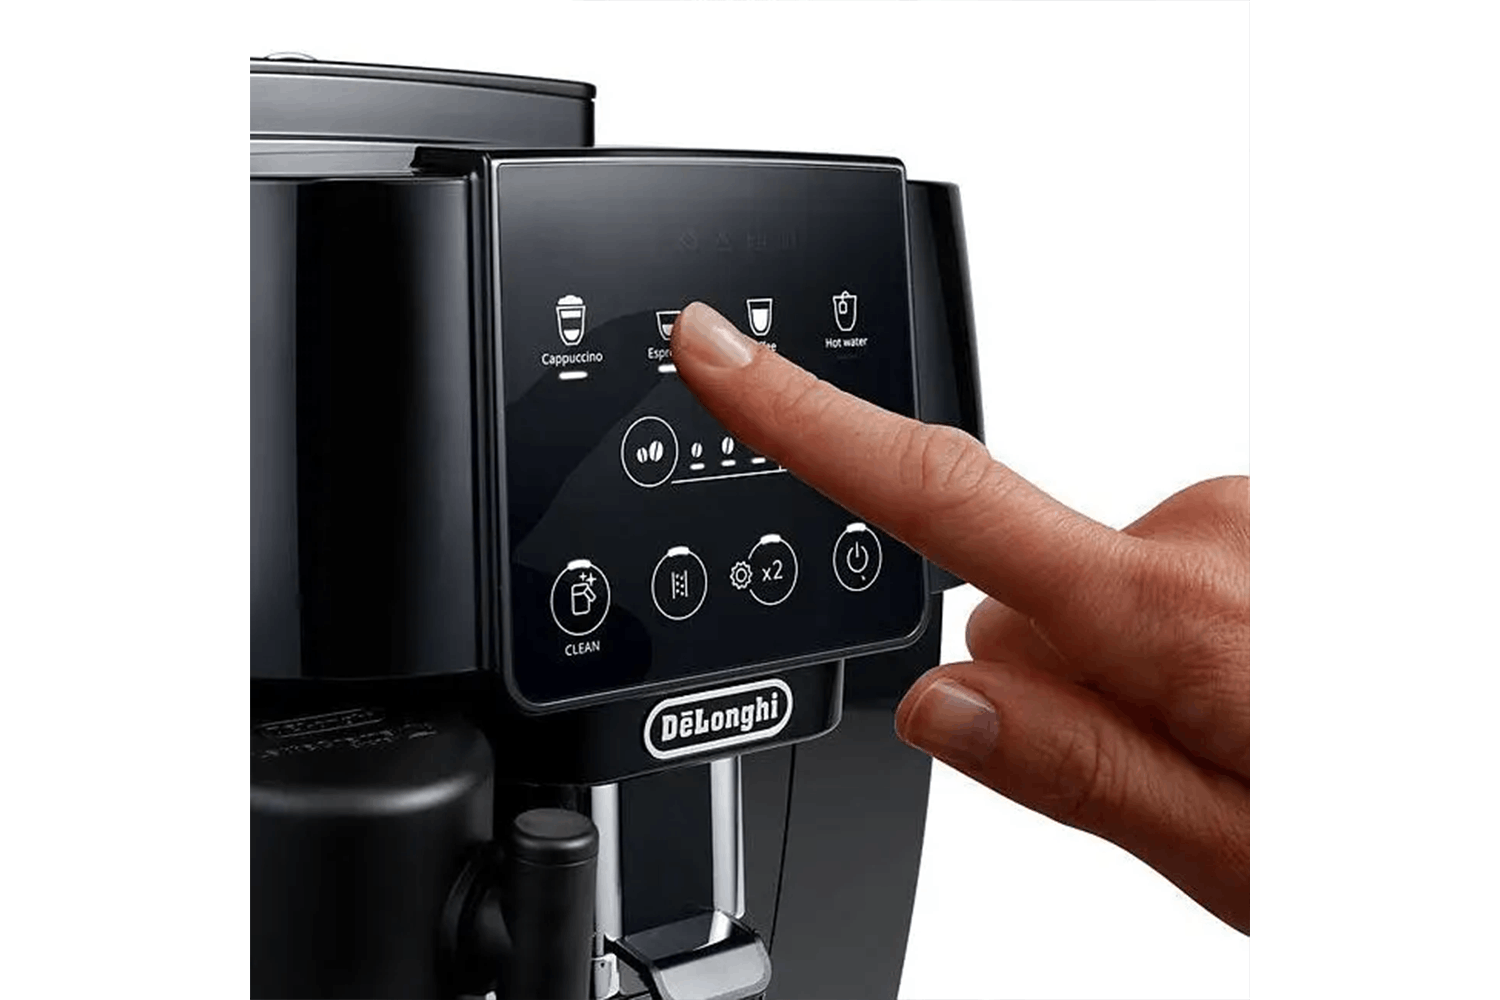 DeLonghi Magnifica Start Fully Automatic Bean to Cup Coffee Machine, ECAM220.60.B, Black